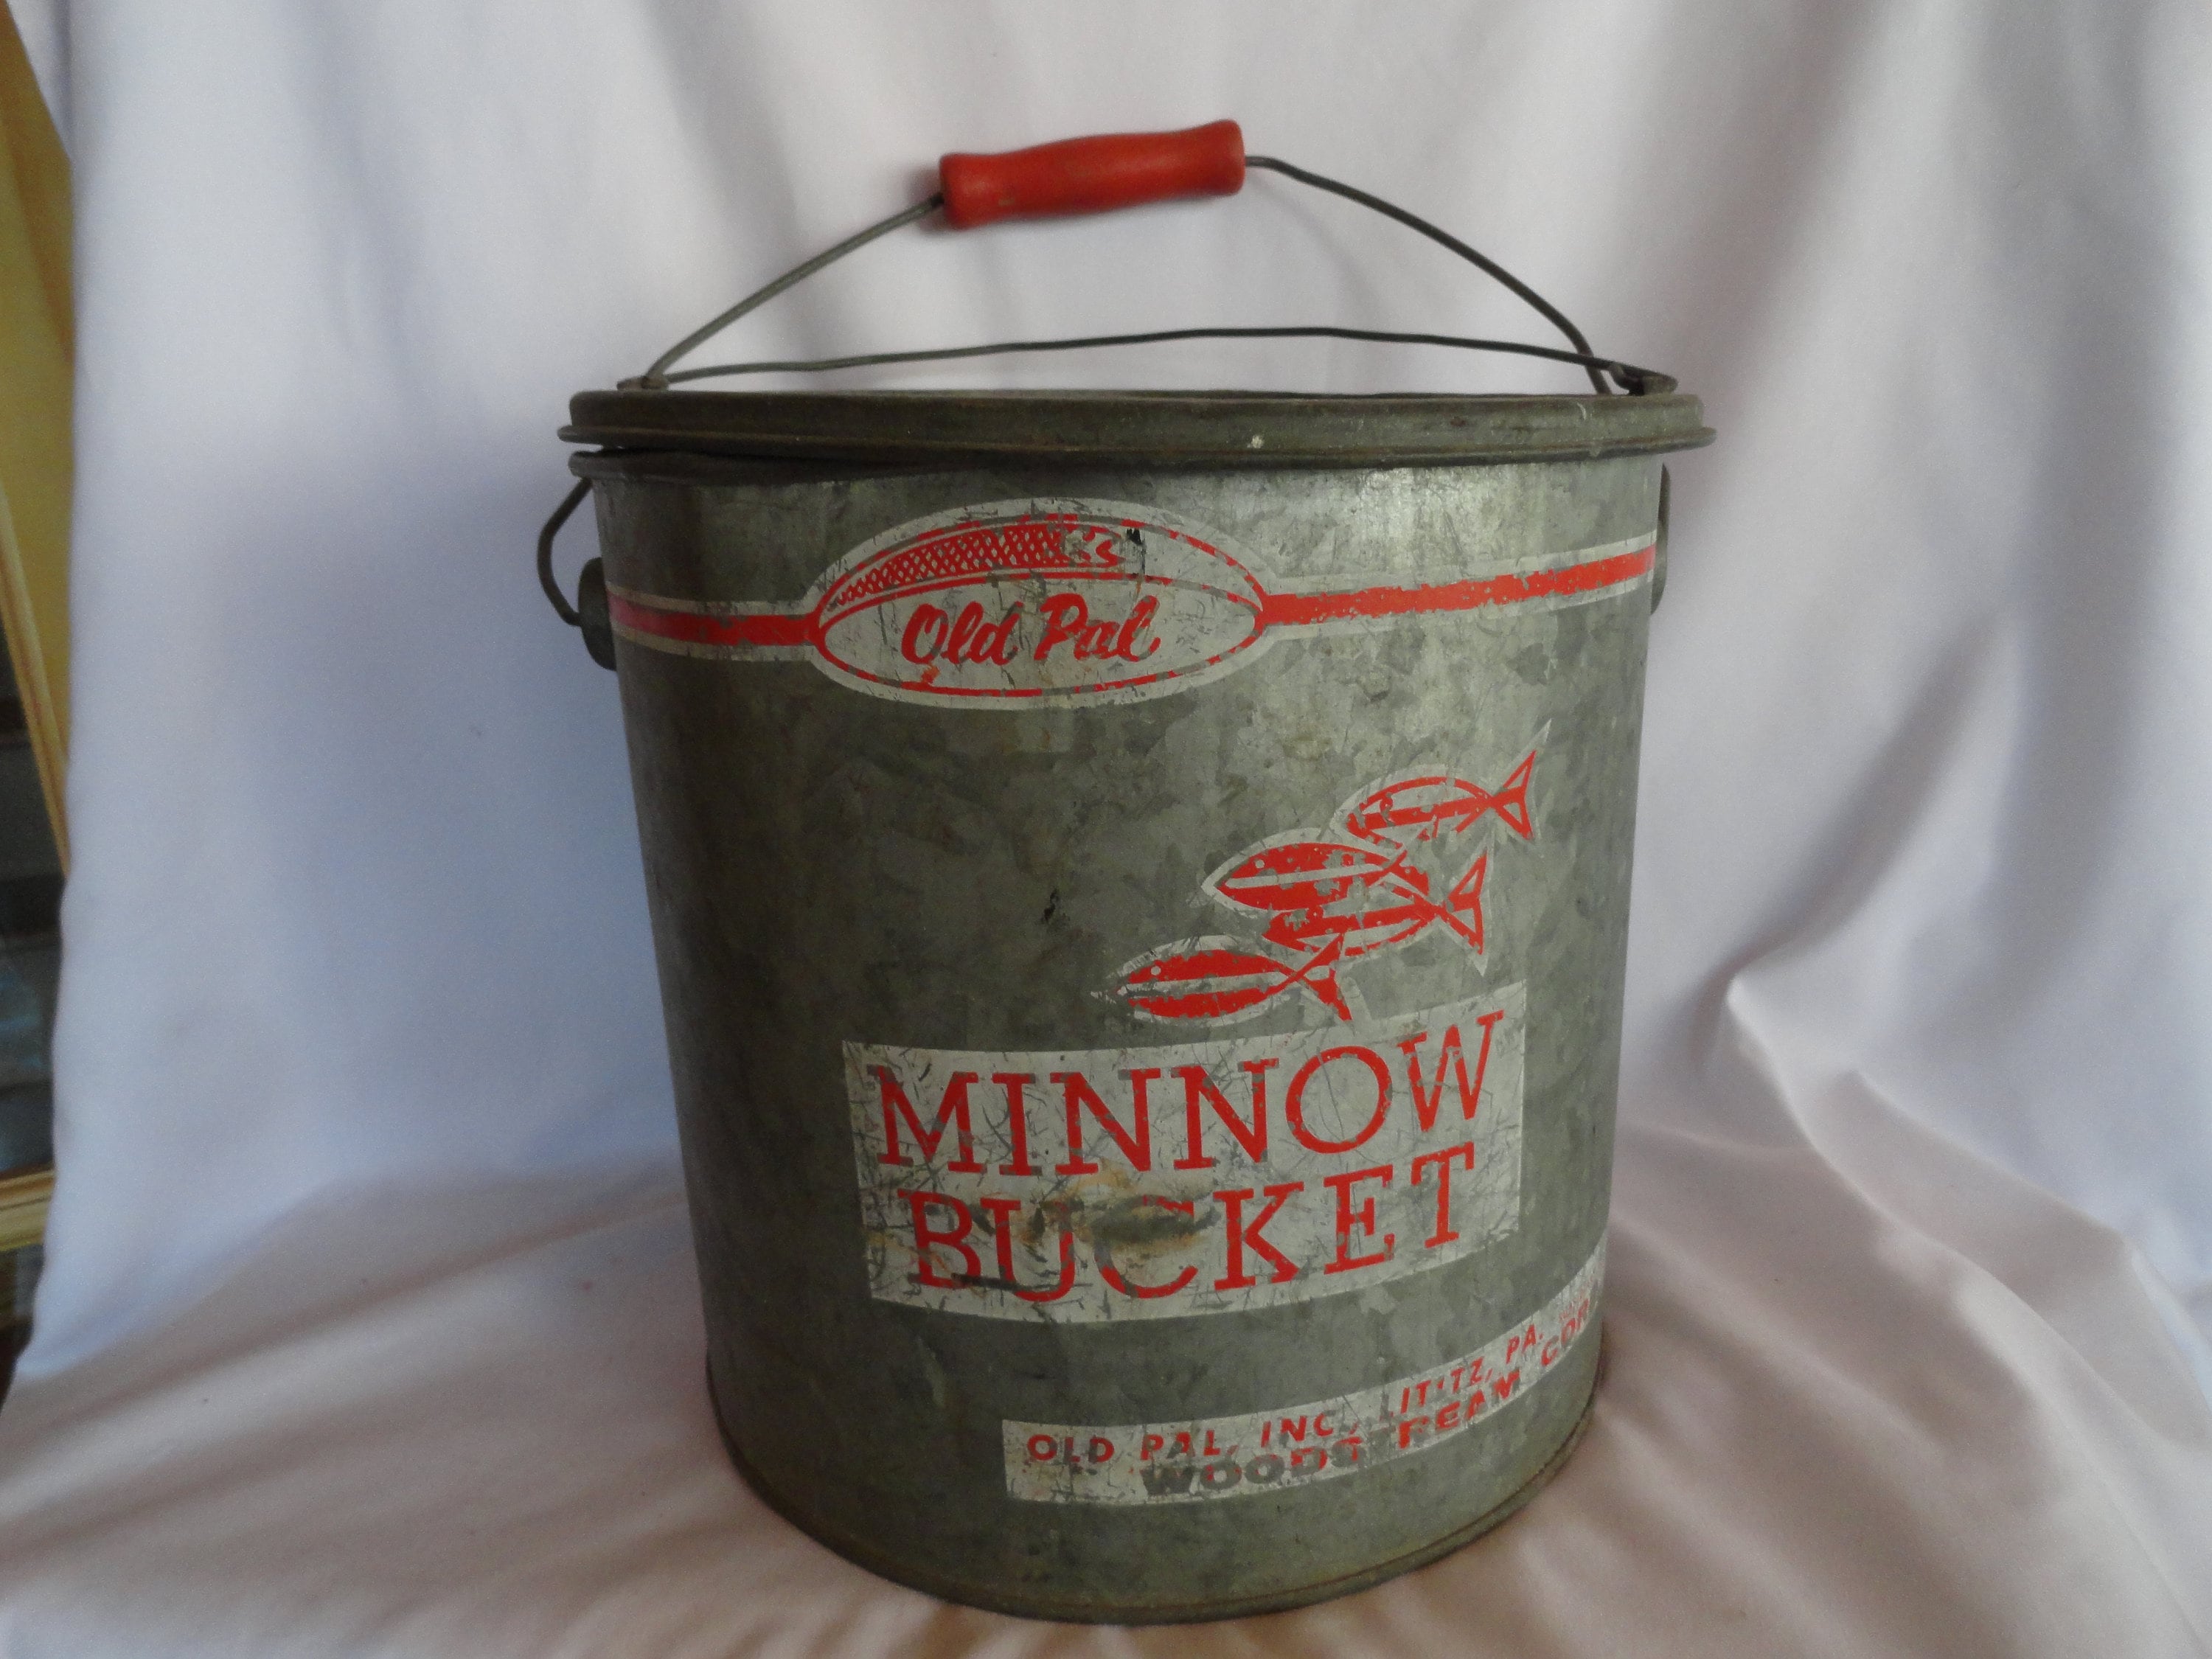 Lot - OLD PAL MINNOW BUCKET GAME, HUNTING, FISHING, ADVERTISING